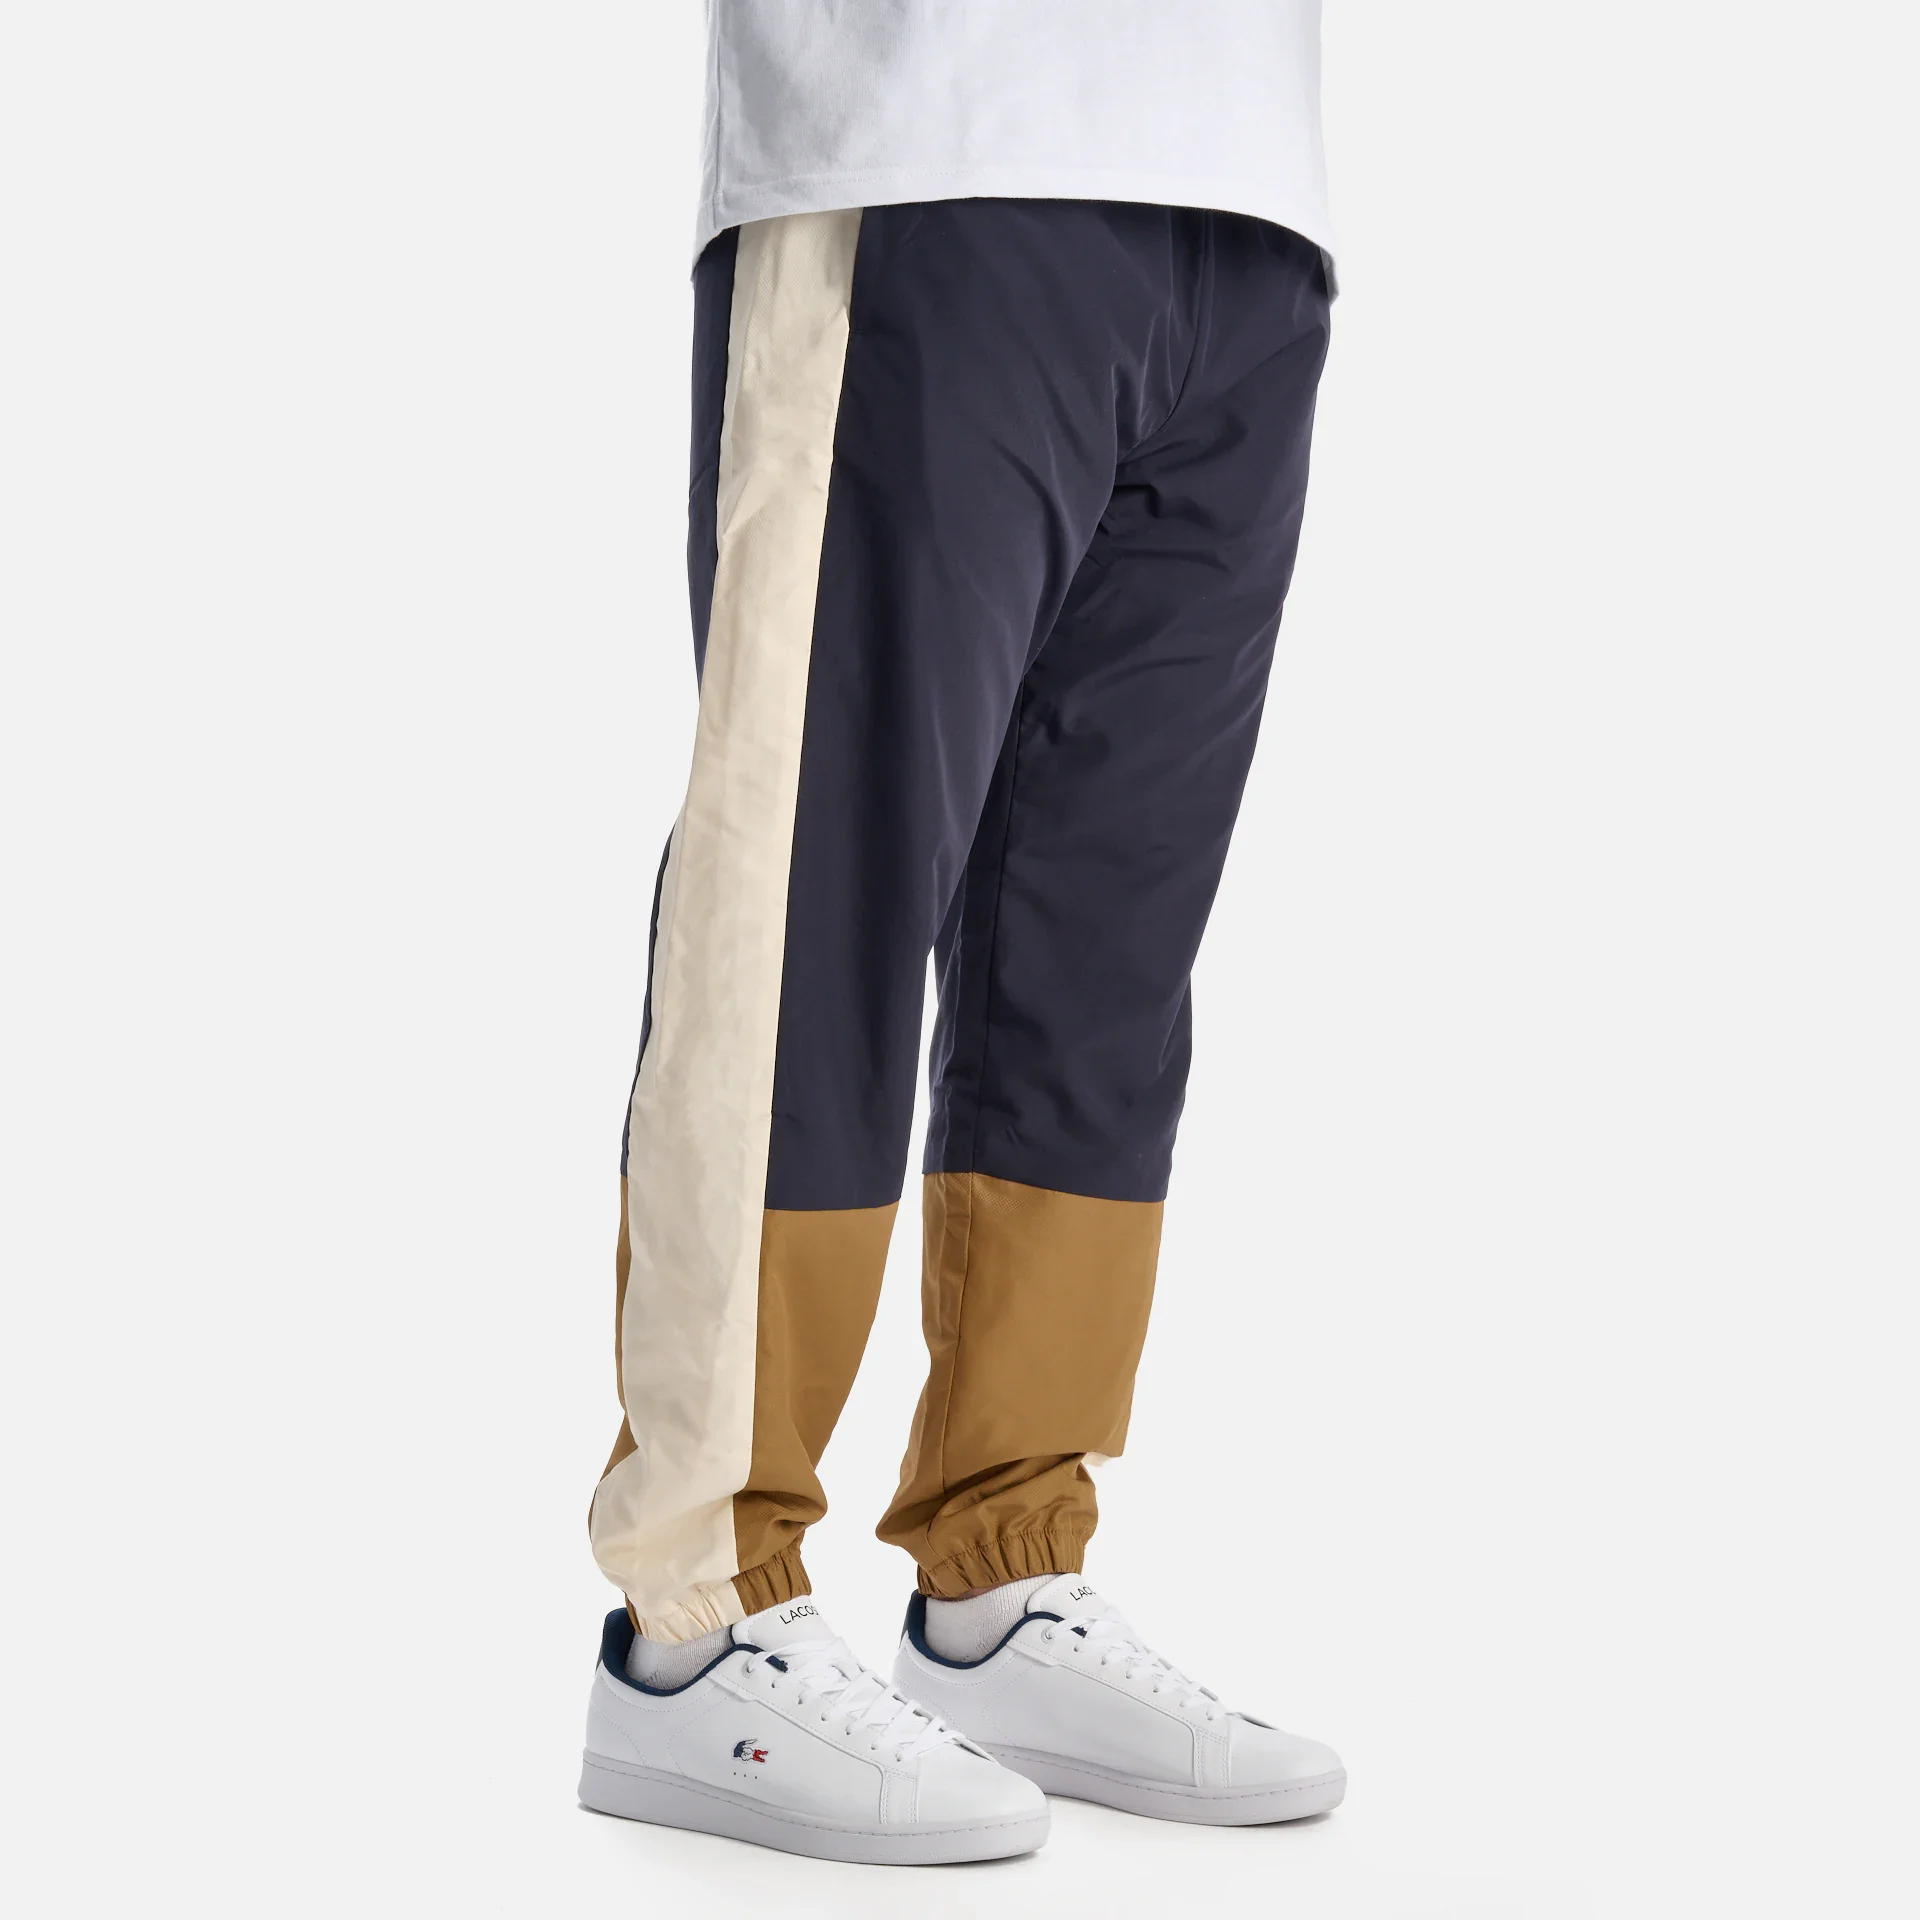 Lacoste Water Repellent Recycled Fiber Track Pants Abysm/Cookie/Lapland